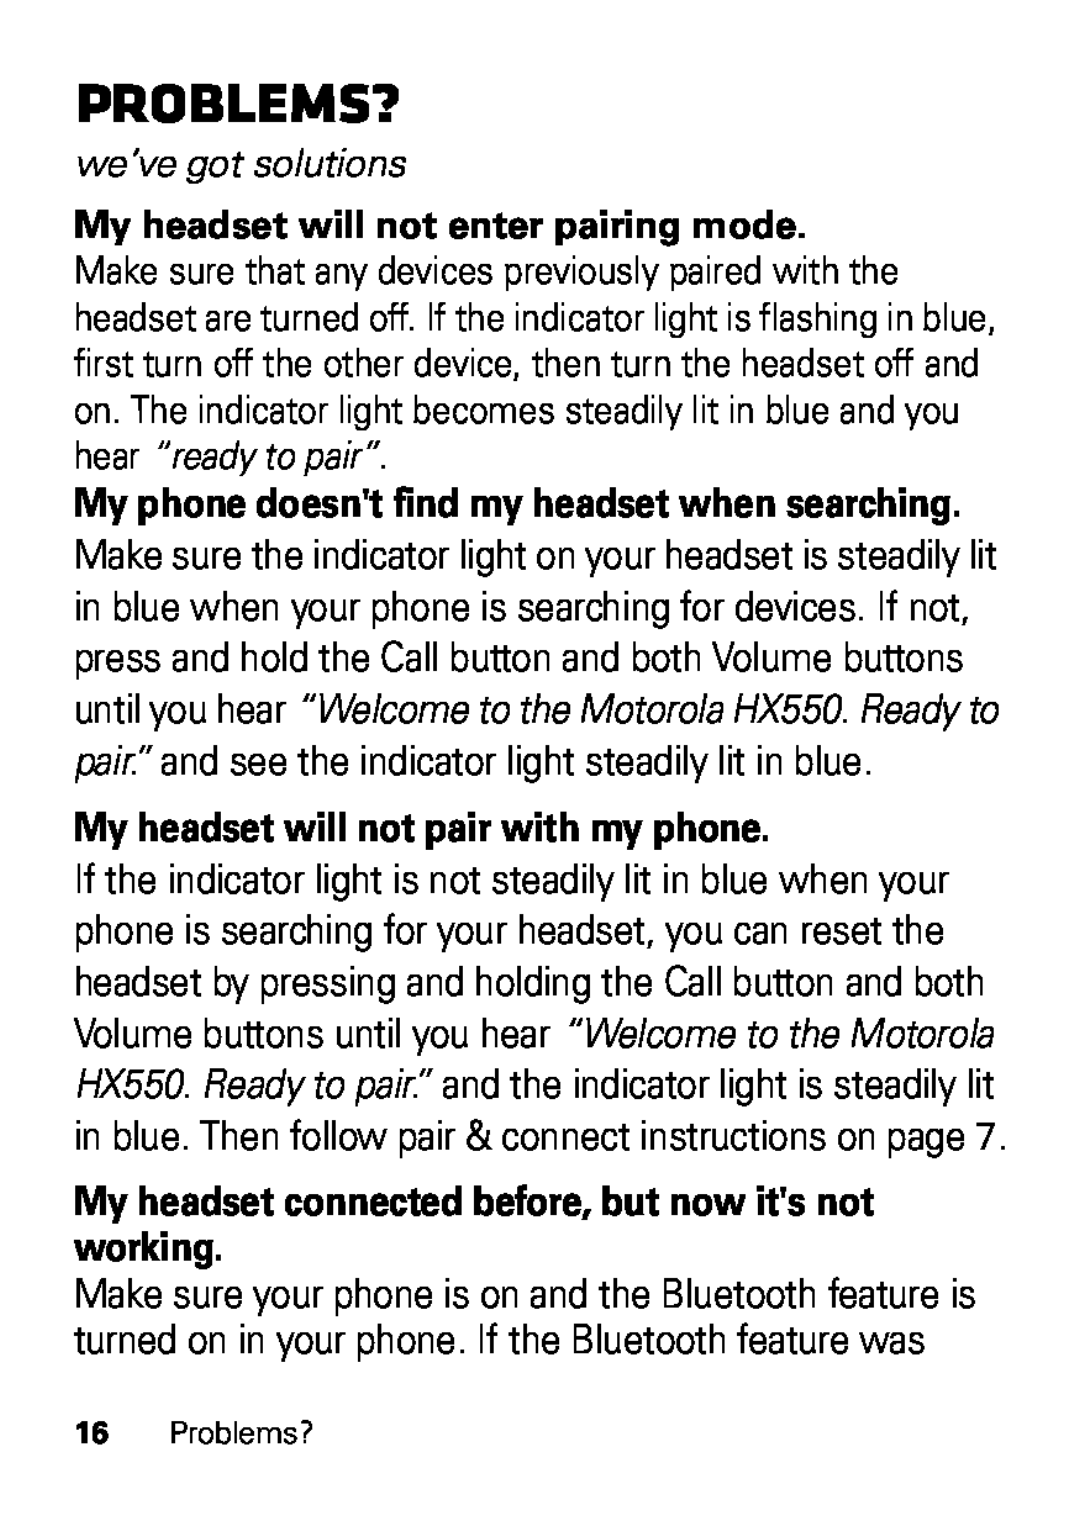 Motorola HX550 manual Problems?, My headset will not pair with my phone, we’ve got solutions 